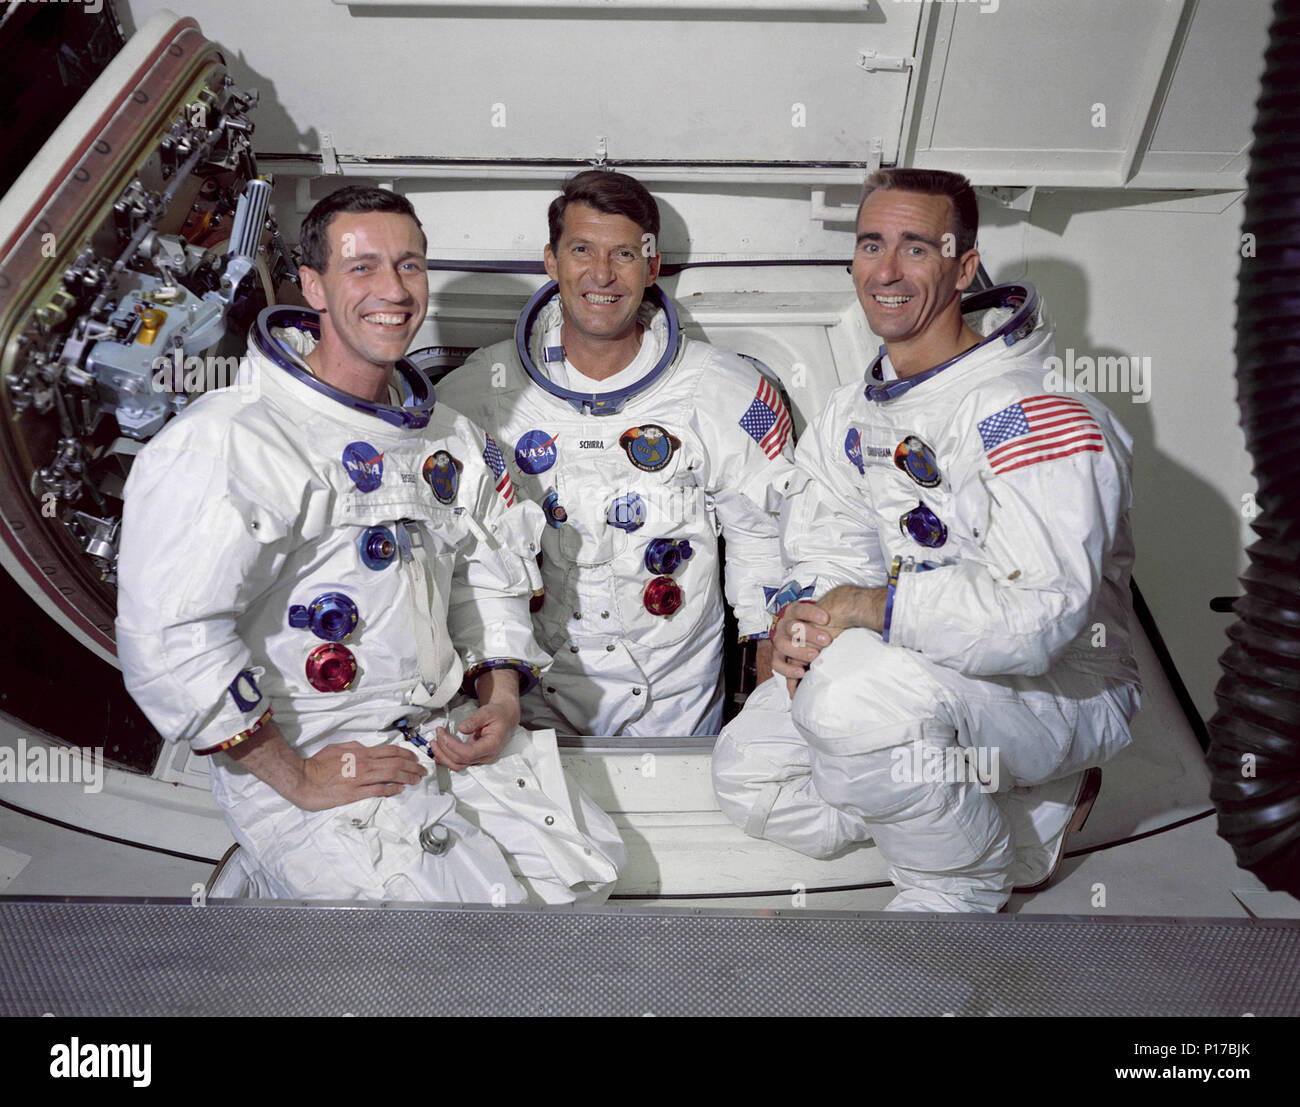 The prime crew of the first manned Apollo space mission from left to right are: Command Module pilot, Don F. Eisele, Commander, Walter M. Schirra Jr. and Lunar Module pilot, Walter Cunningham. The photograph was taken inside the White Room which is attached to the crew access arm. From here astronauts ingress and egress the spacecraft. Commander Wally Schirra Jr. is seen inside the opening of the Command Module's main hatch. Stock Photo